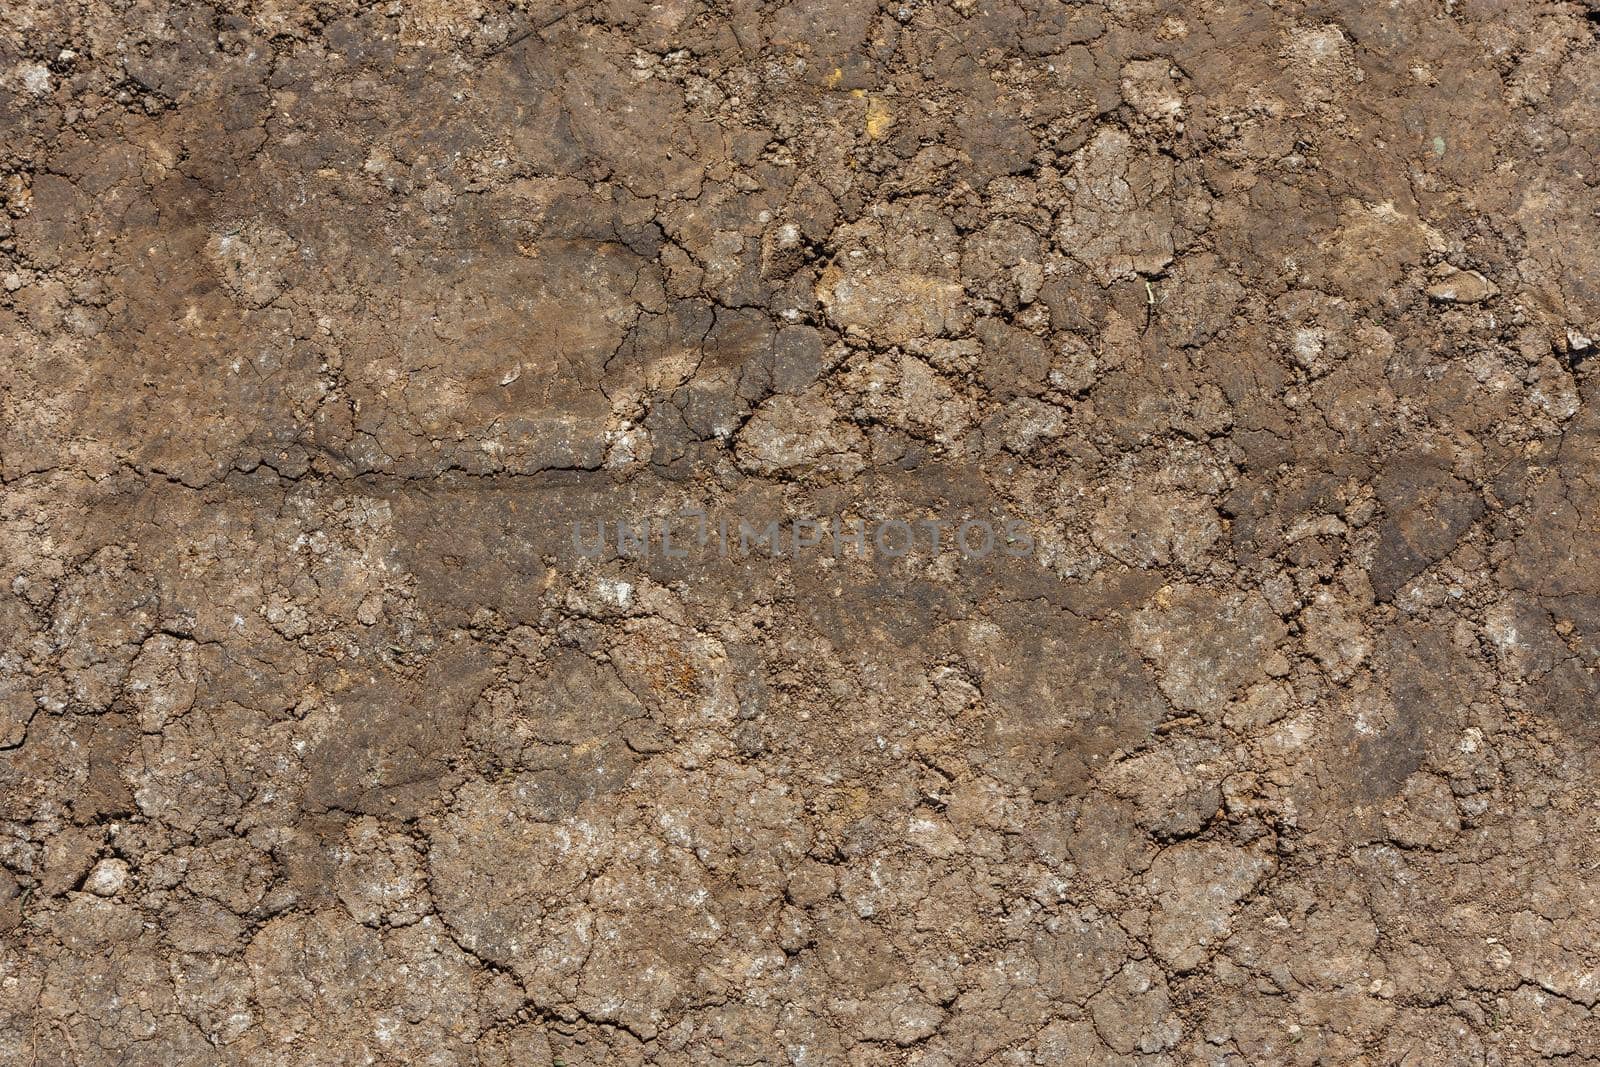 dry rammed bare earth surface under direct sunlight - full frame background and texture by z1b